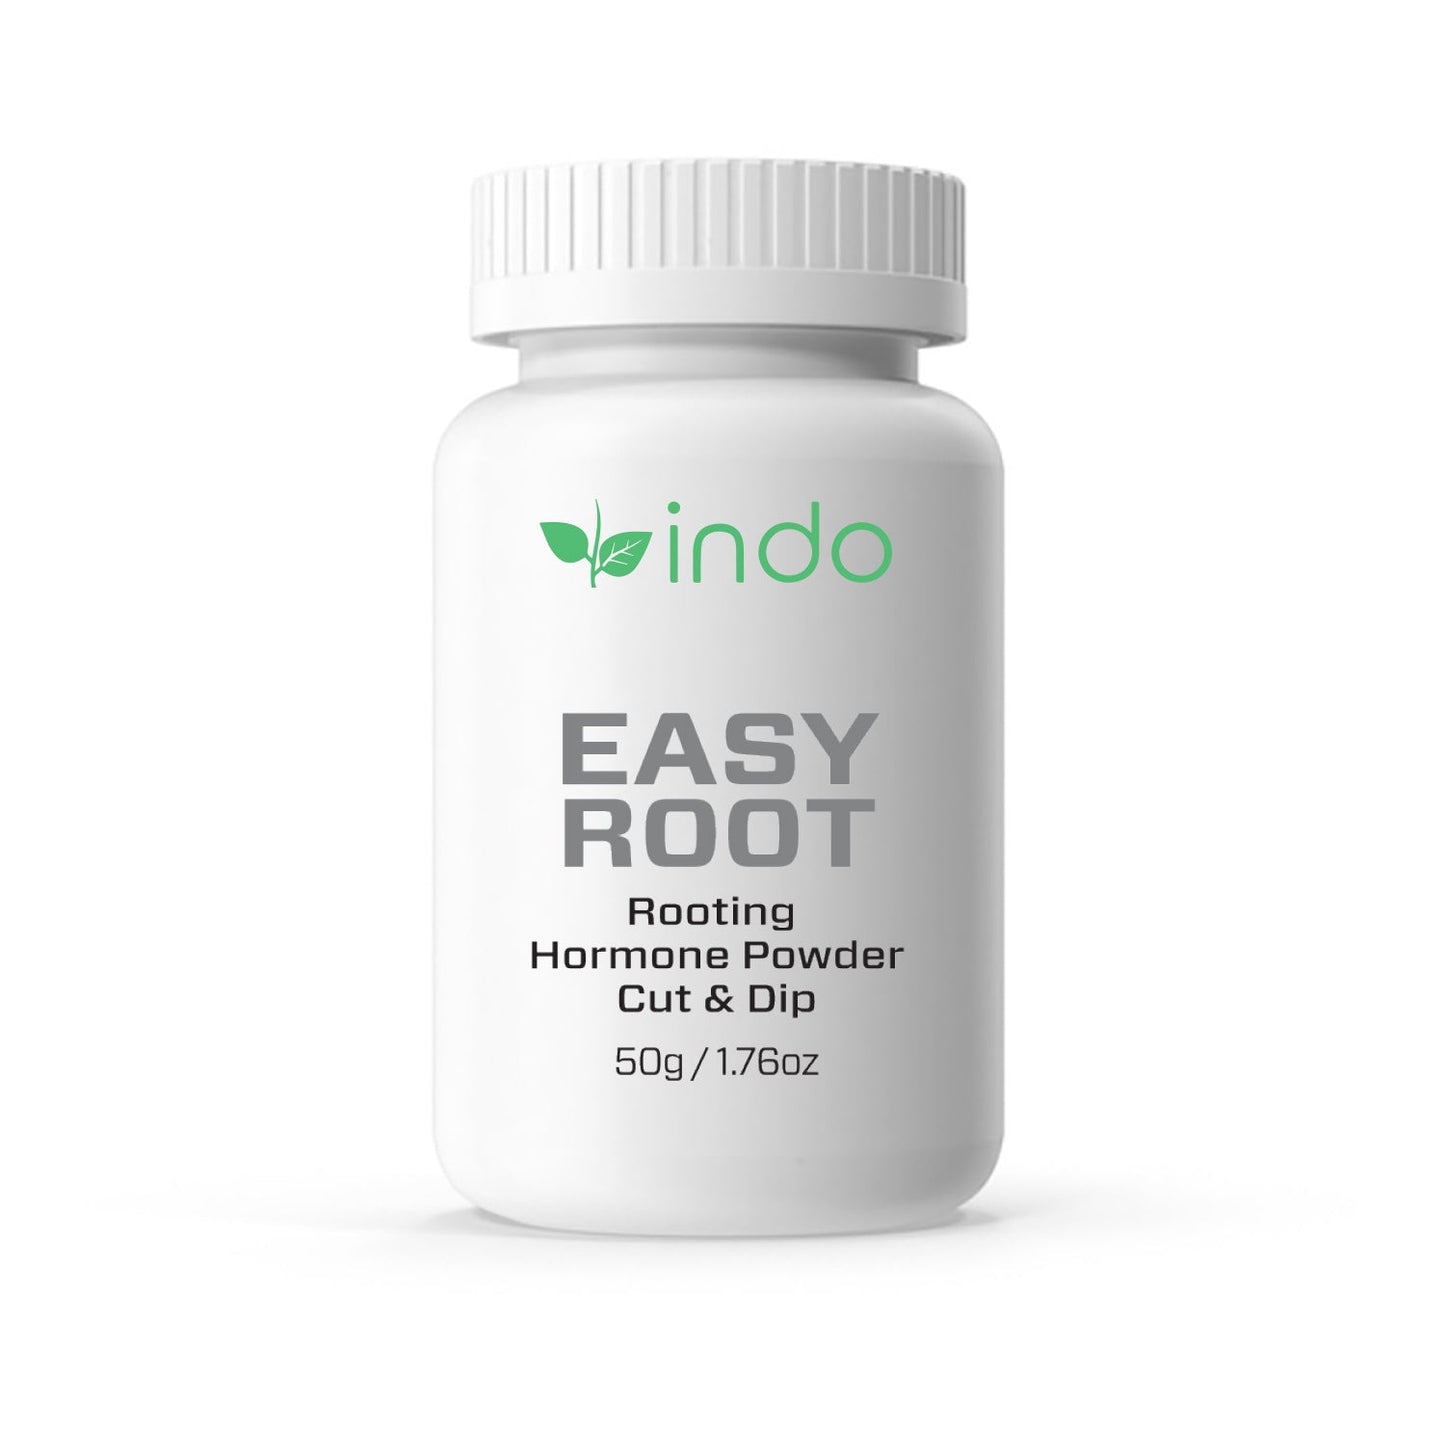 Easy Root and Max Grow - Cloning and Rooting Hormone Plus Indo Max Grow for Cutting Health